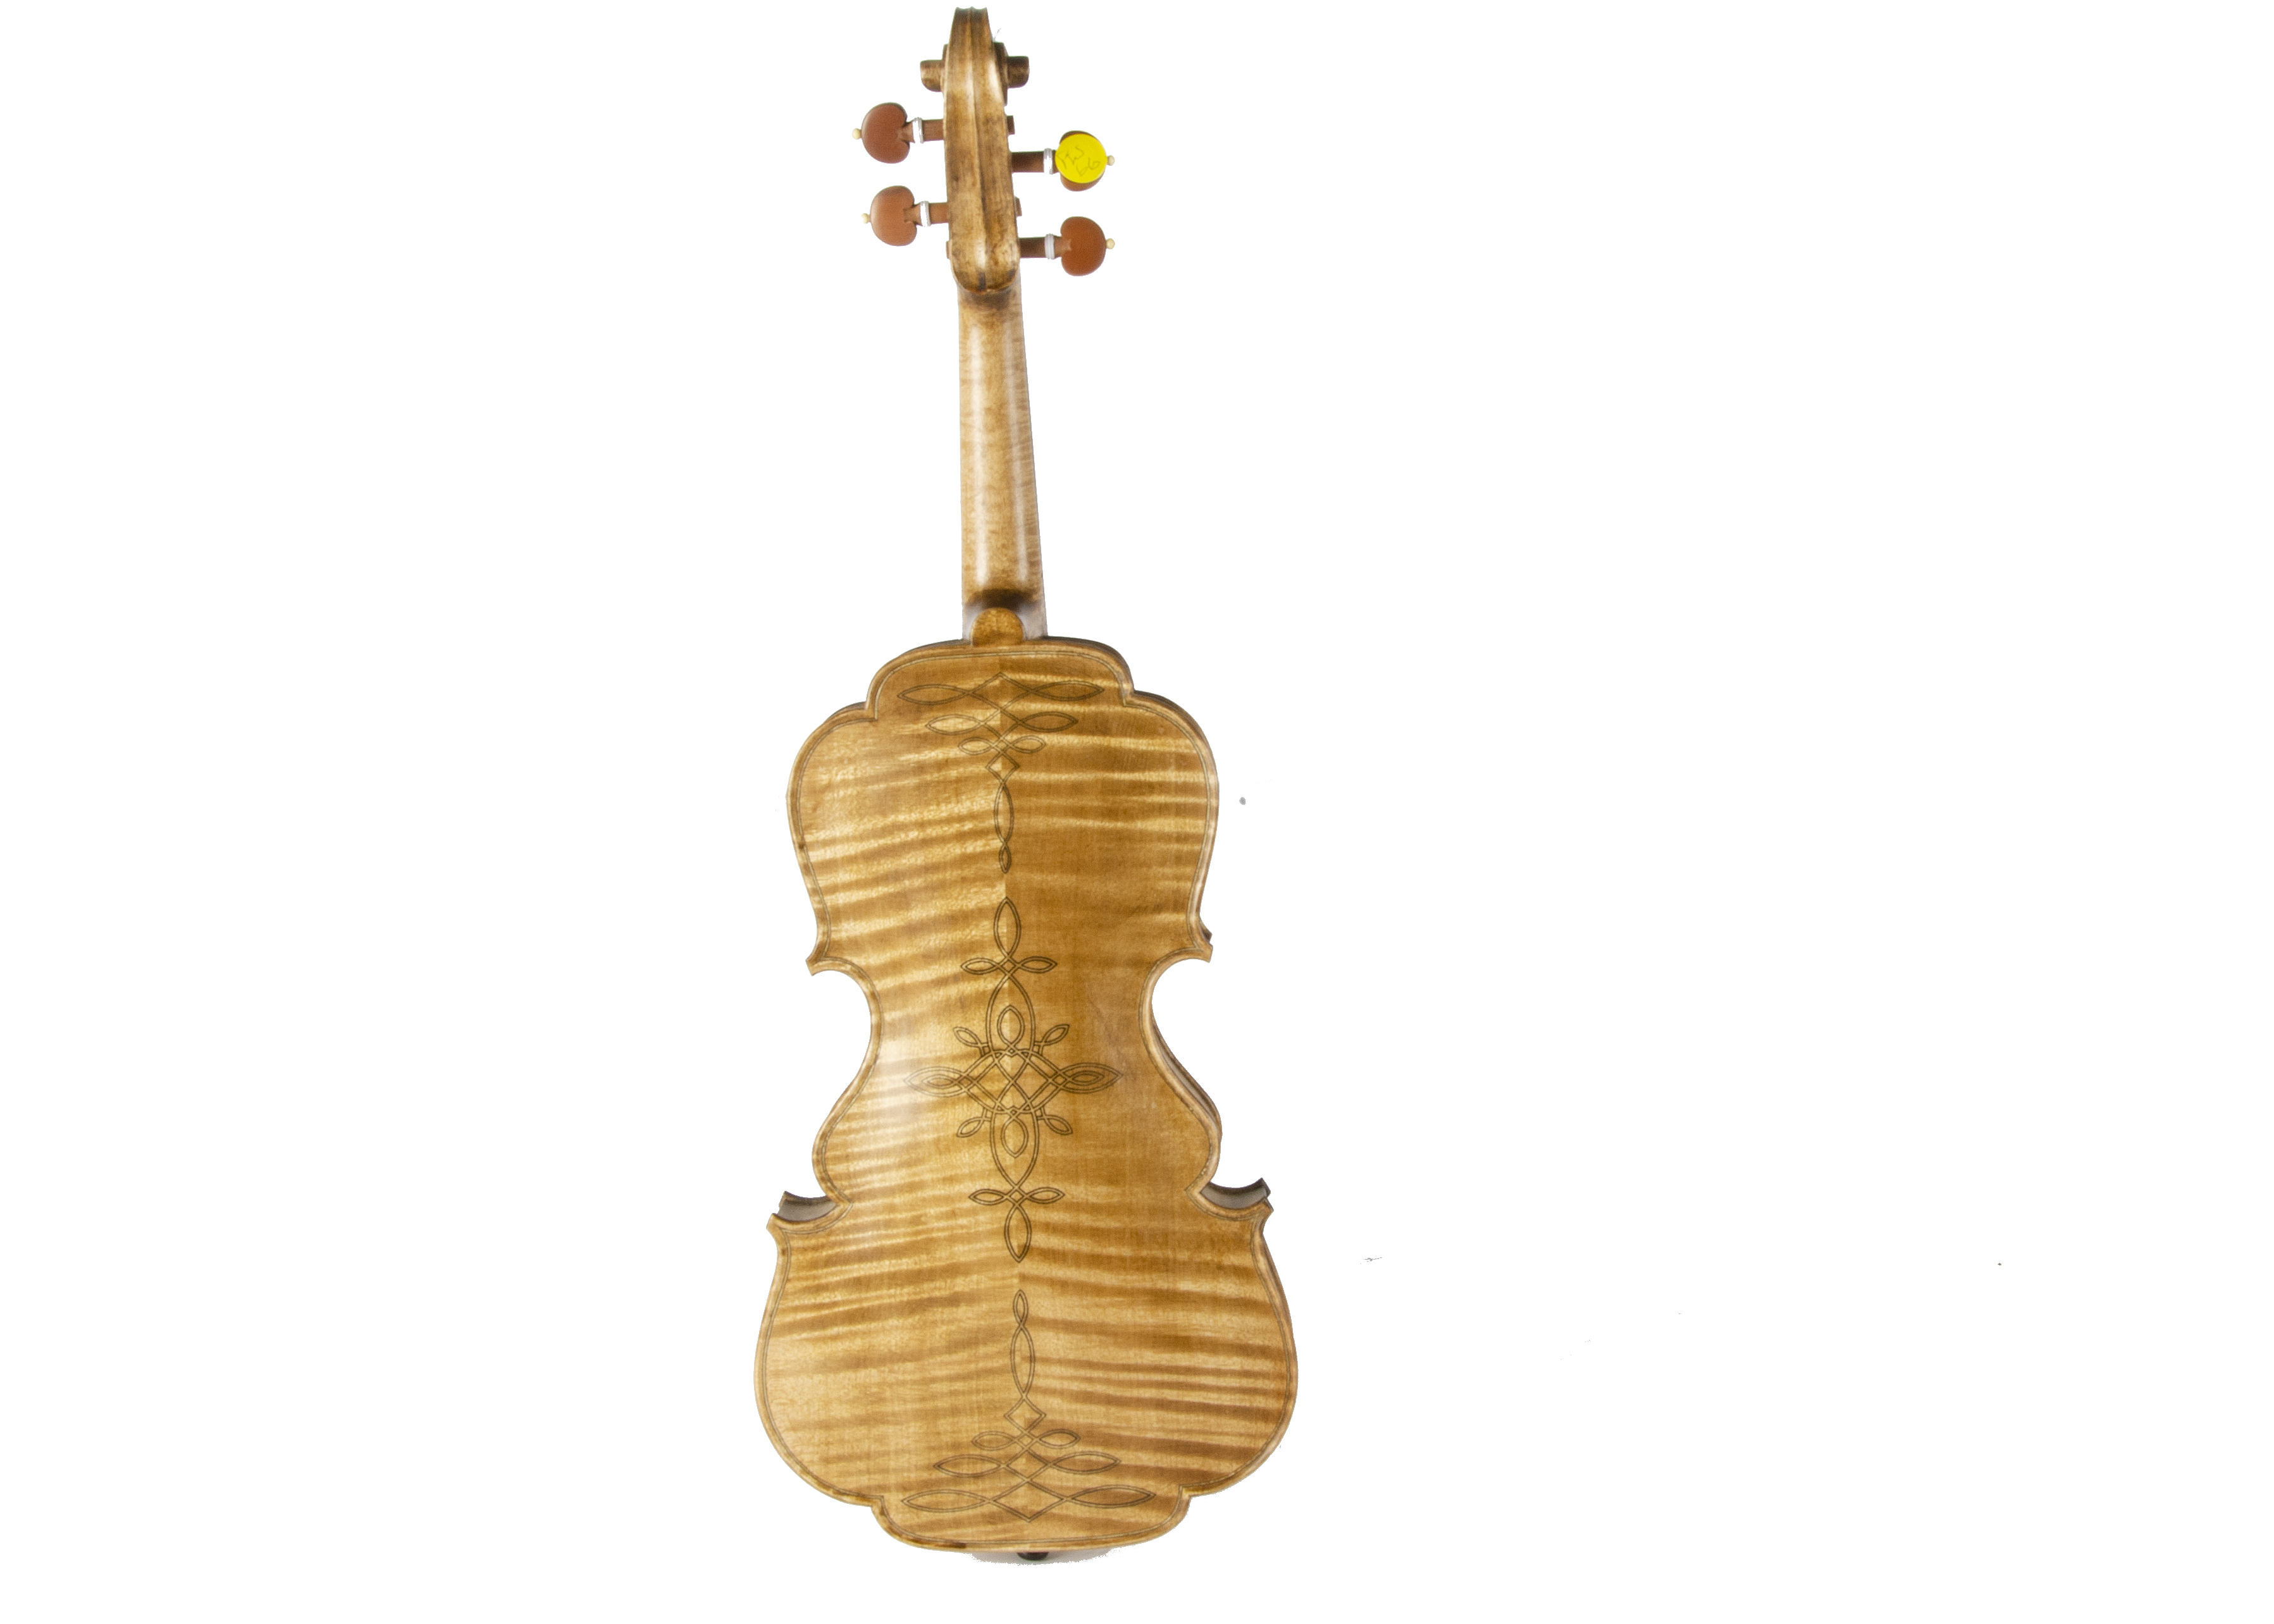 Violin, contemporary unusual-shape violin with back purfling design, no maker's name apparent, - Image 3 of 3